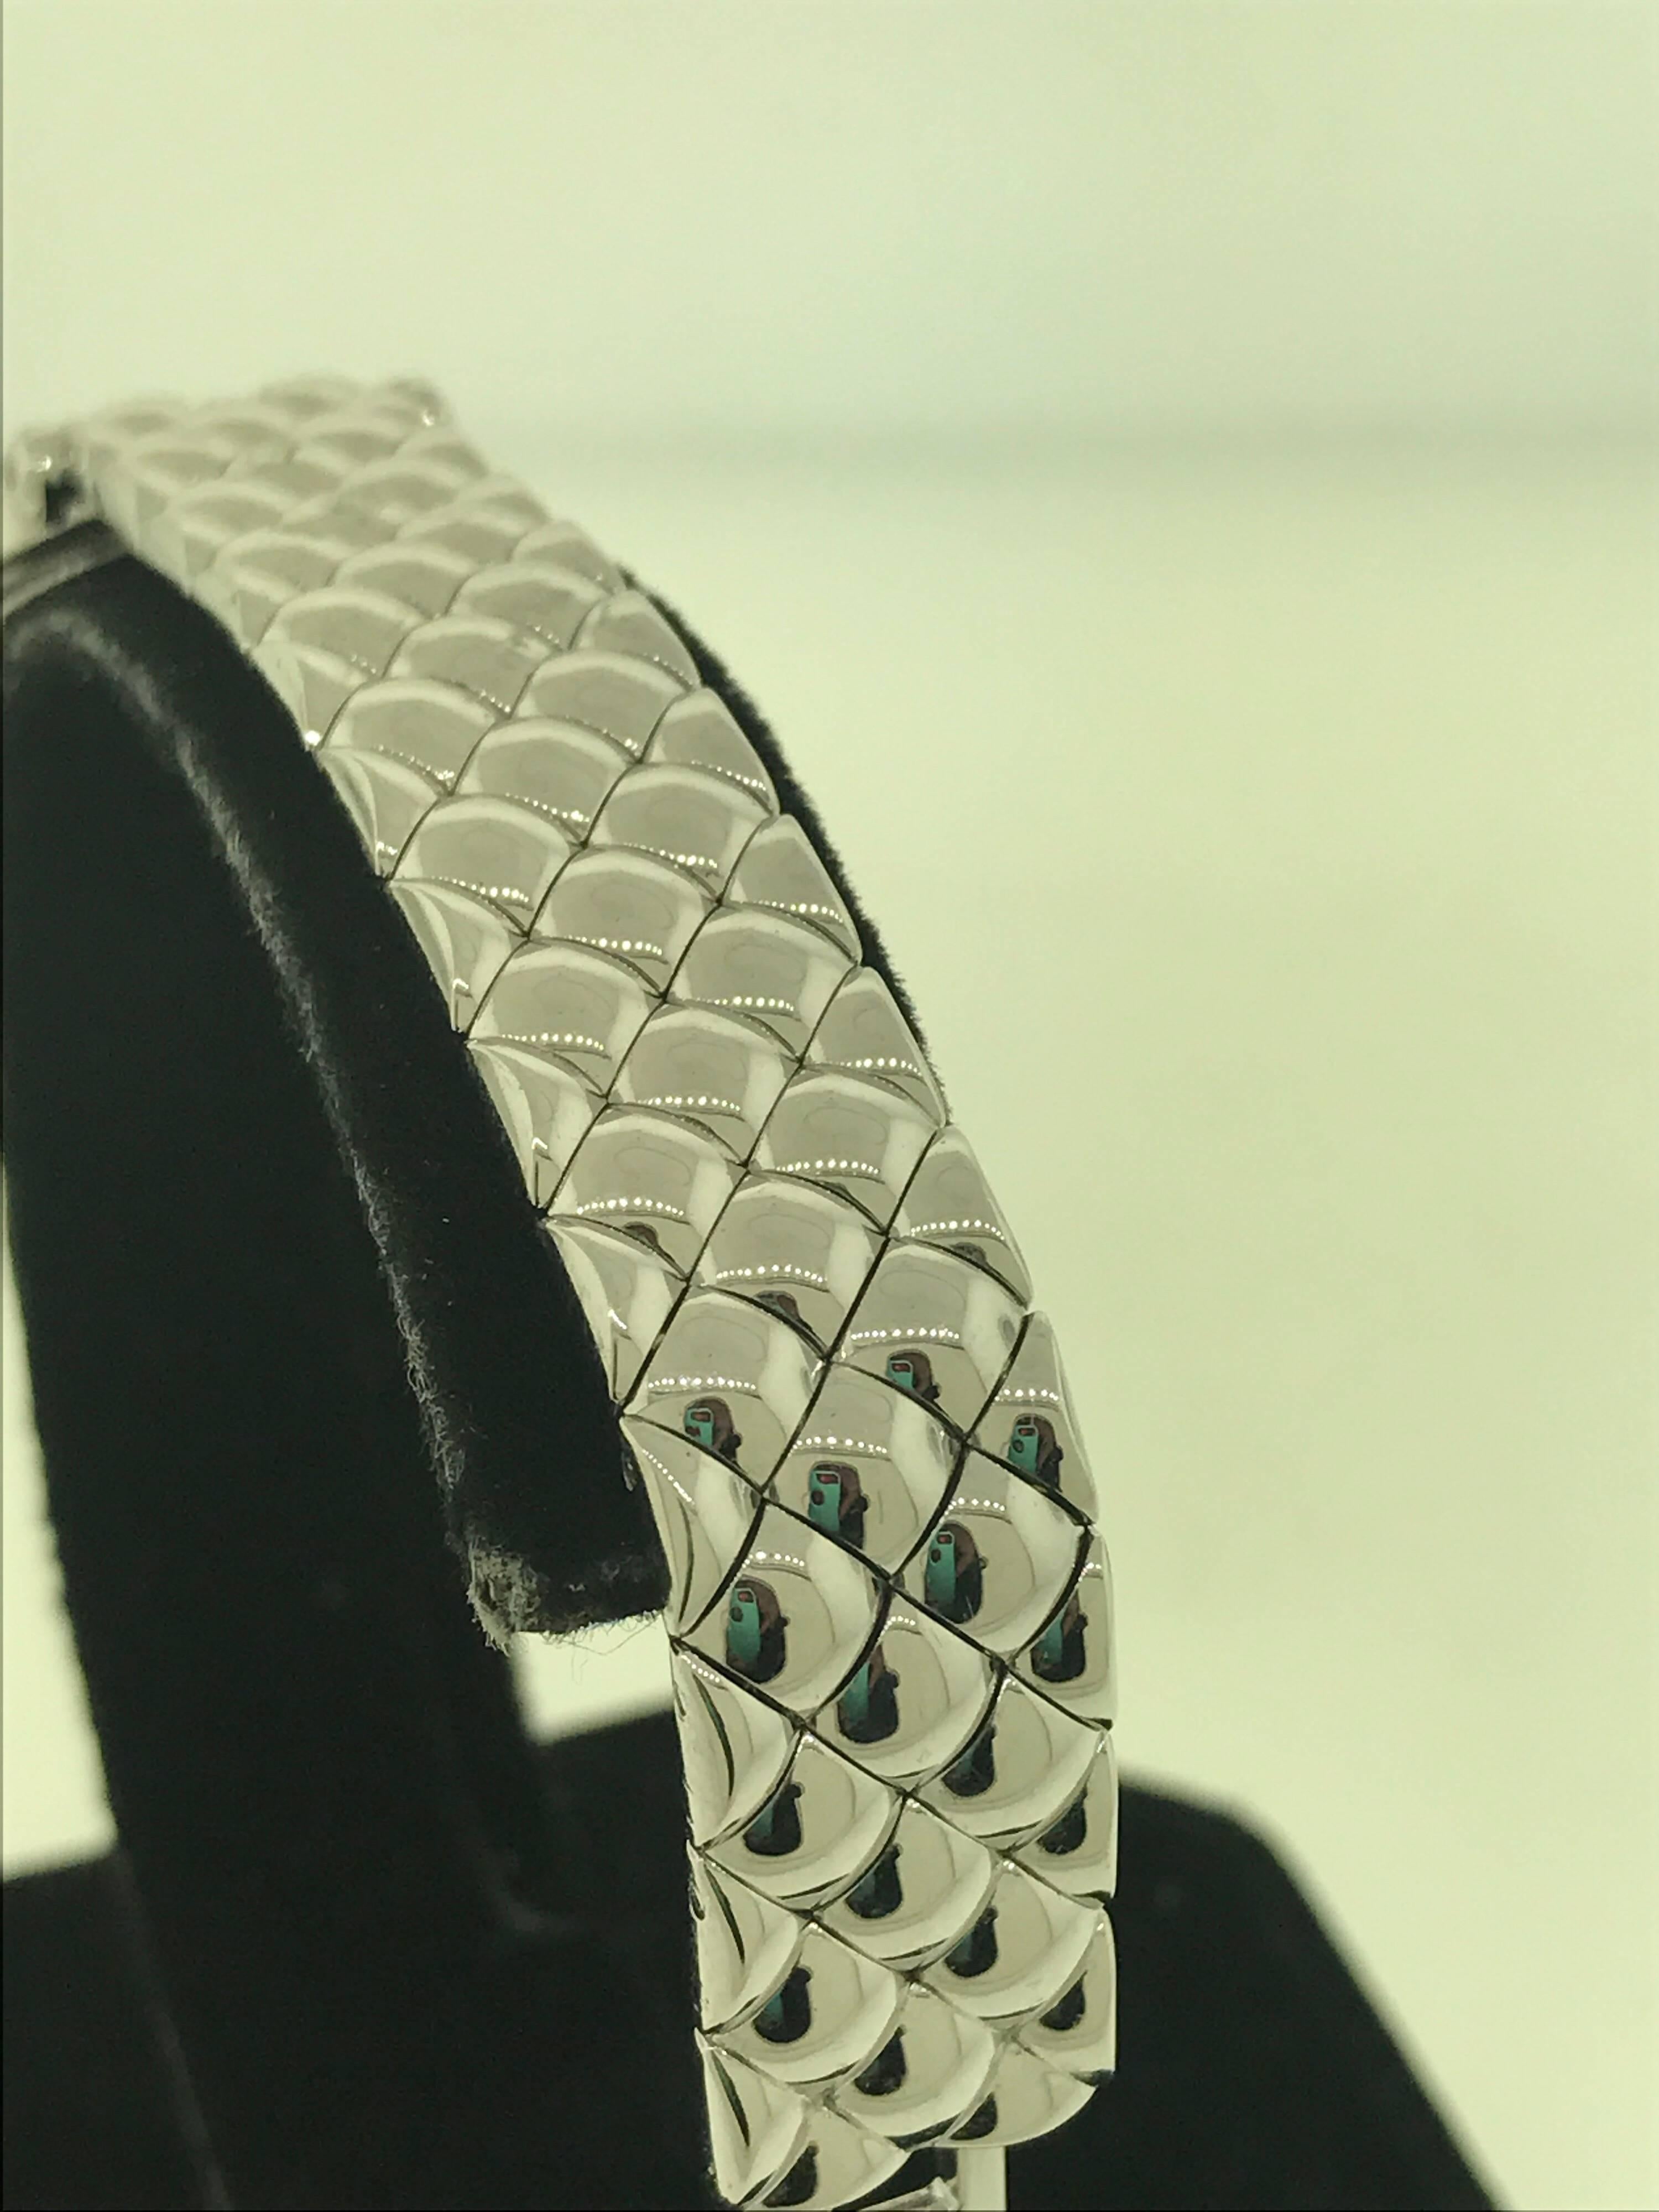 Van Cleef & Arpels Classique White Gold Diamond Bezel Bracelet Ladies Watch In Excellent Condition For Sale In New York, NY